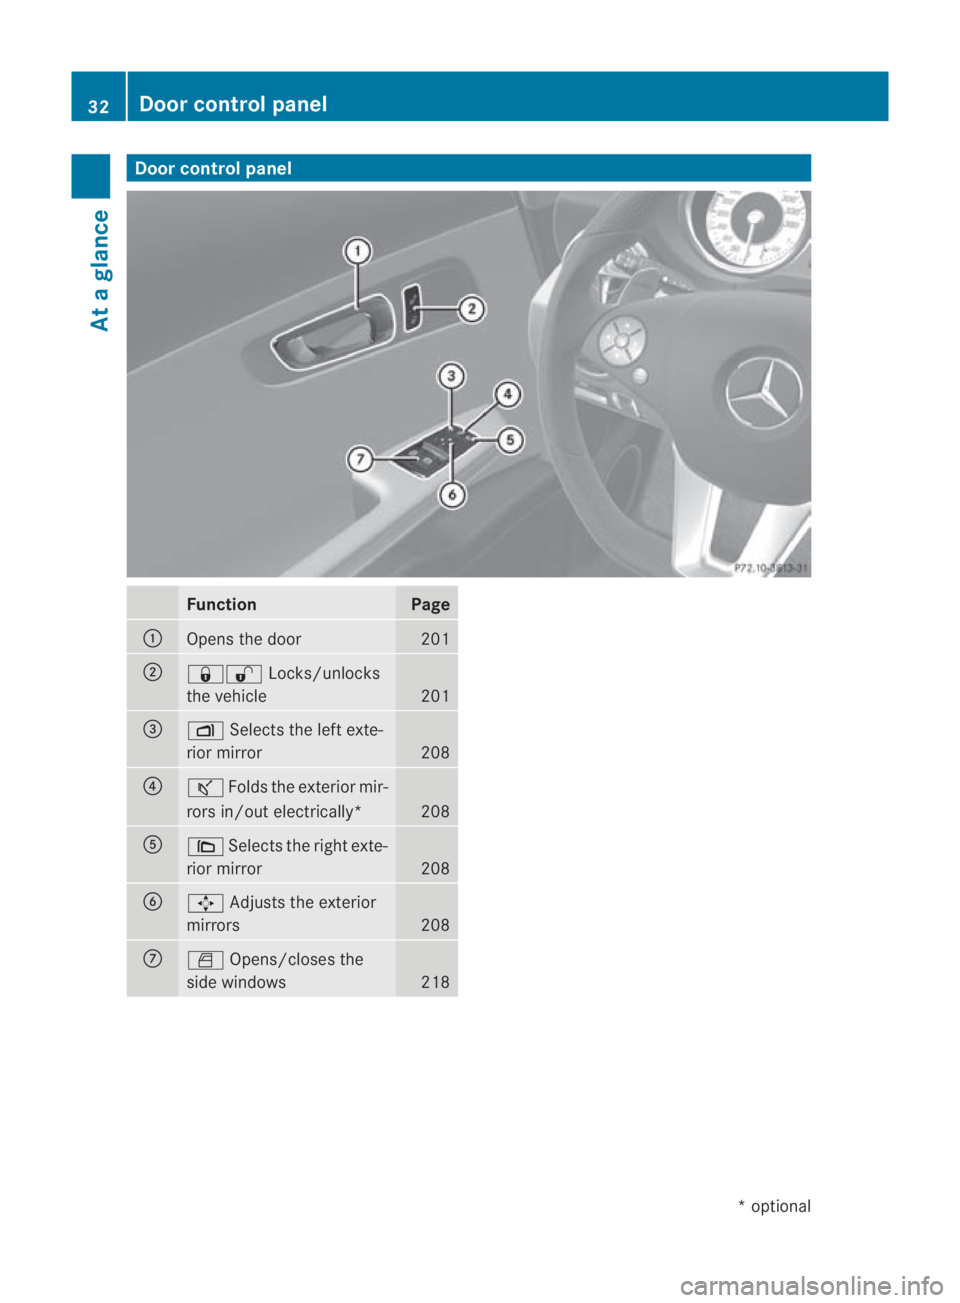 MERCEDES-BENZ SLS COUPE 2010 Owners Guide Door control panel
Function Page
0001
Opens the door 201
0002
0009000B
Locks/unlocks
the vehicle 201
0015
0006
Selects the left exte-
rior mirror 208
0014
000A
Folds the exterio rmir-
rors in/out elec